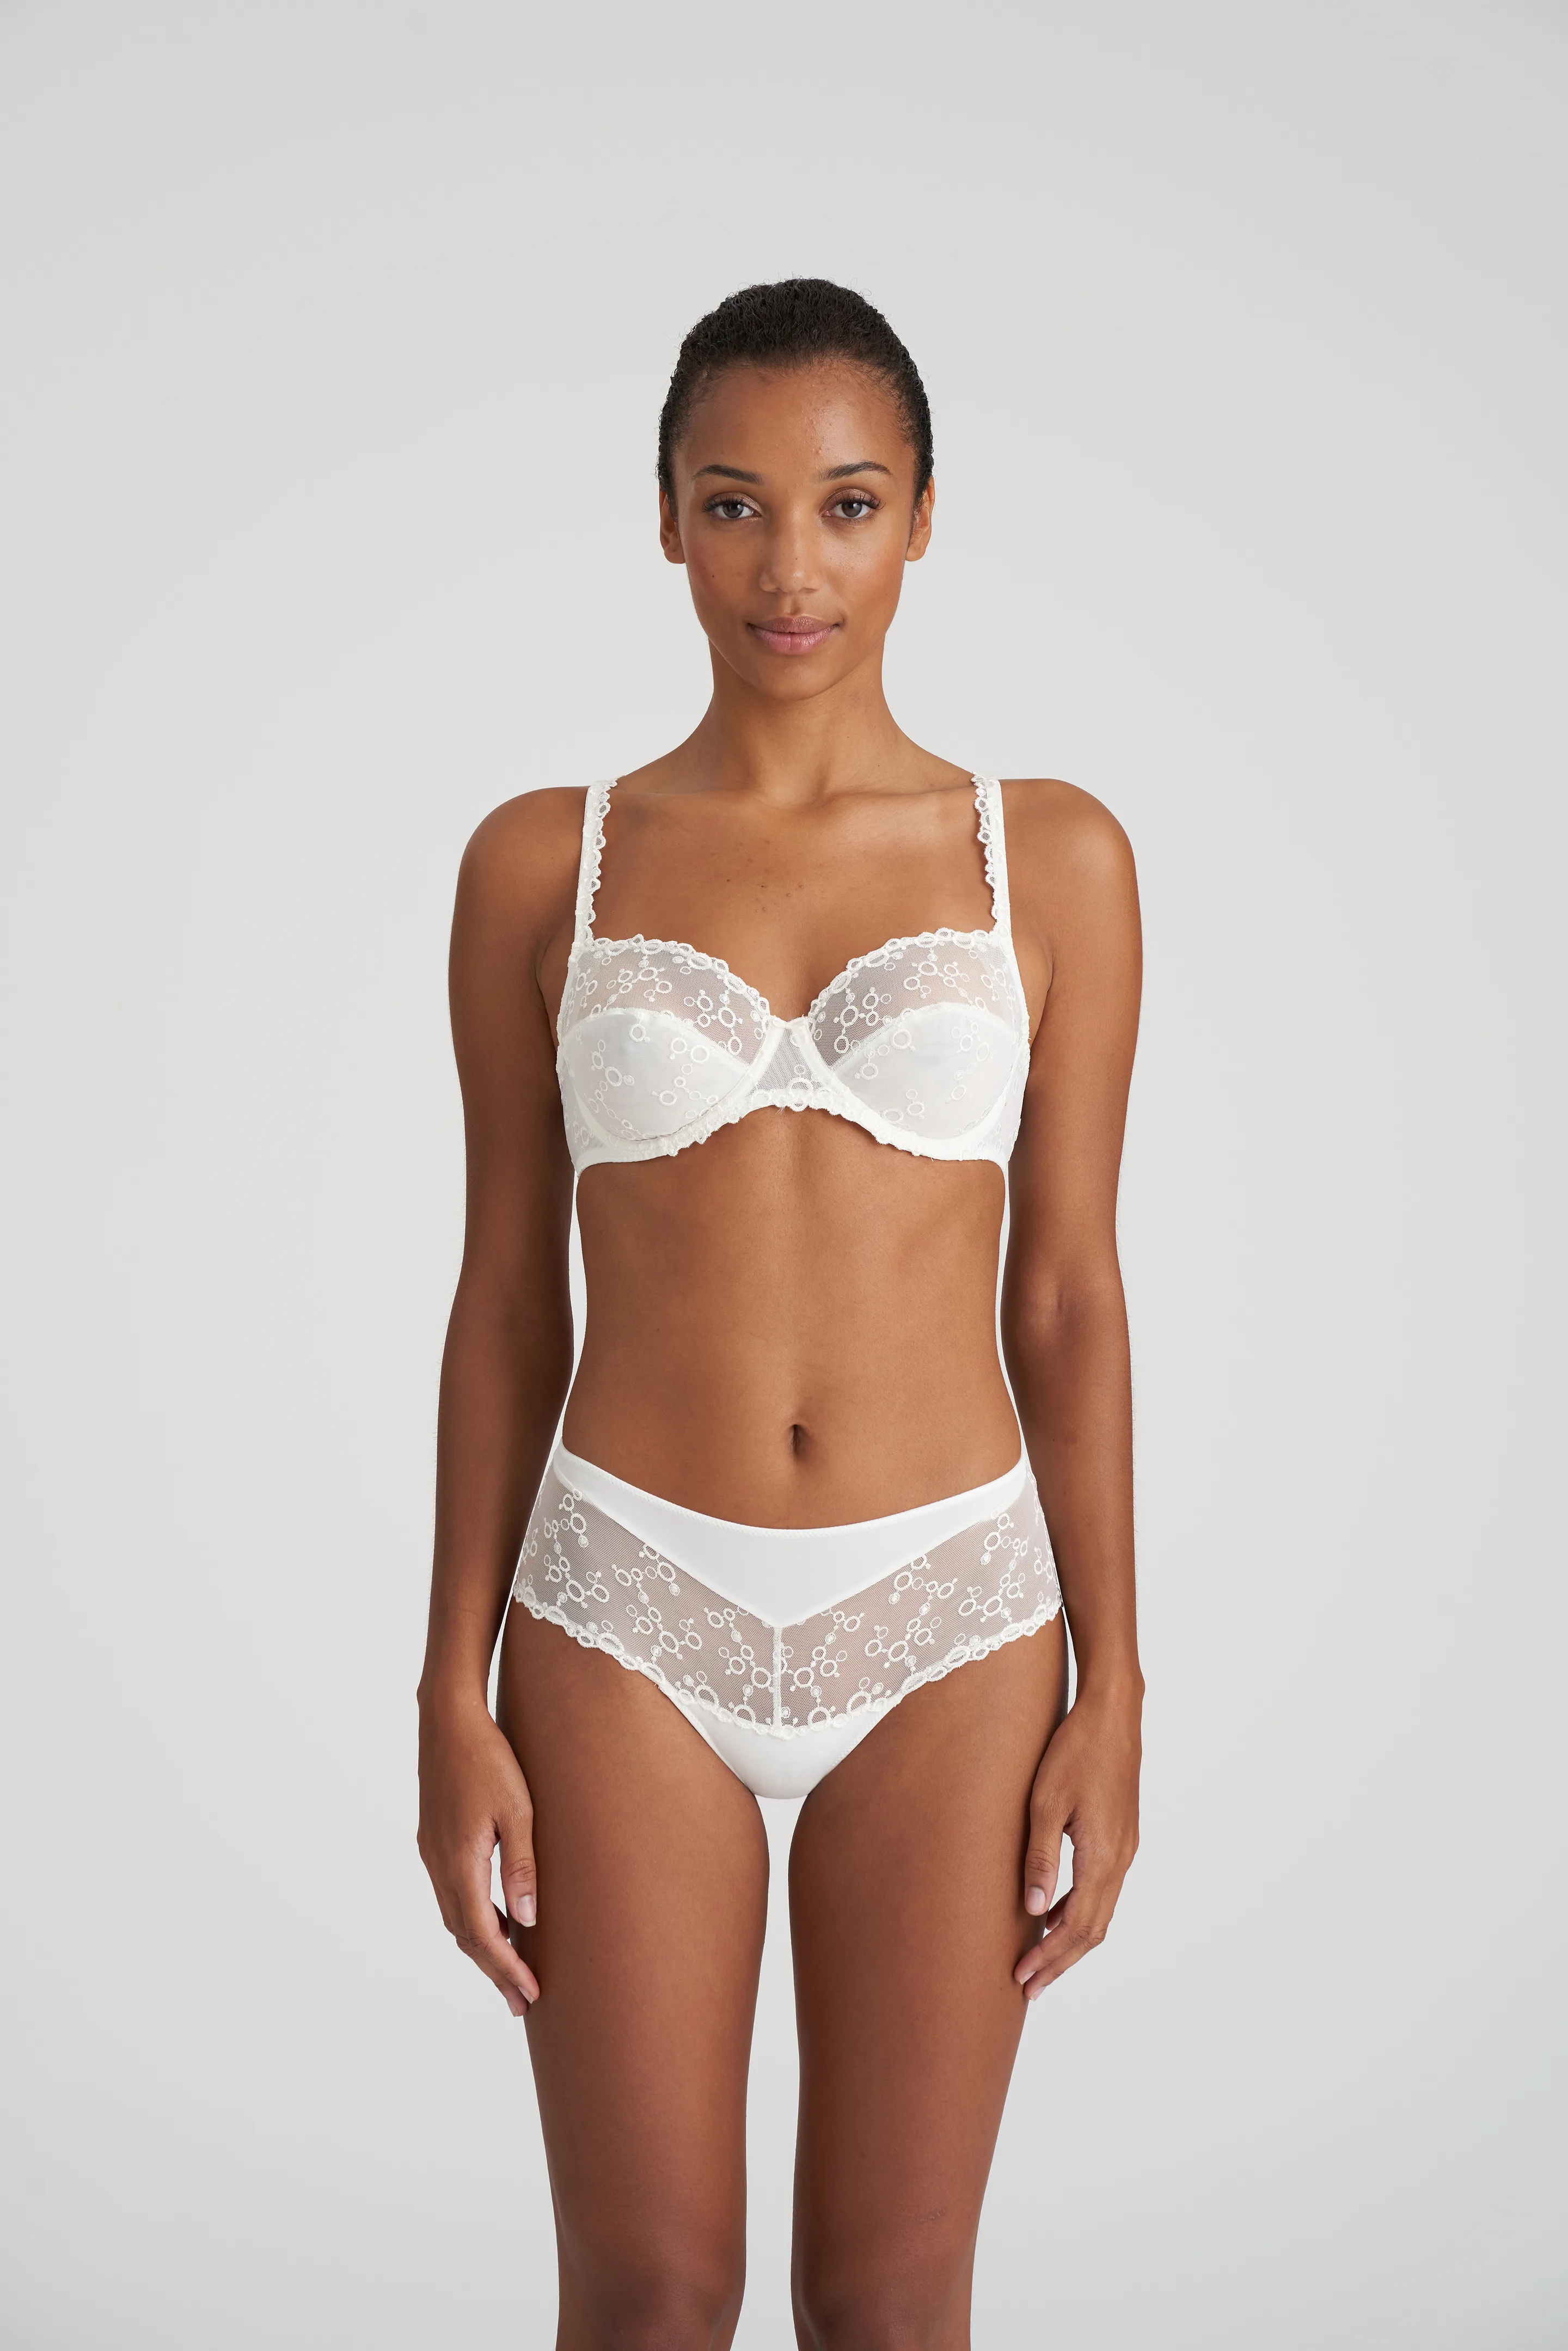 Fuller Cup bra and knickers set